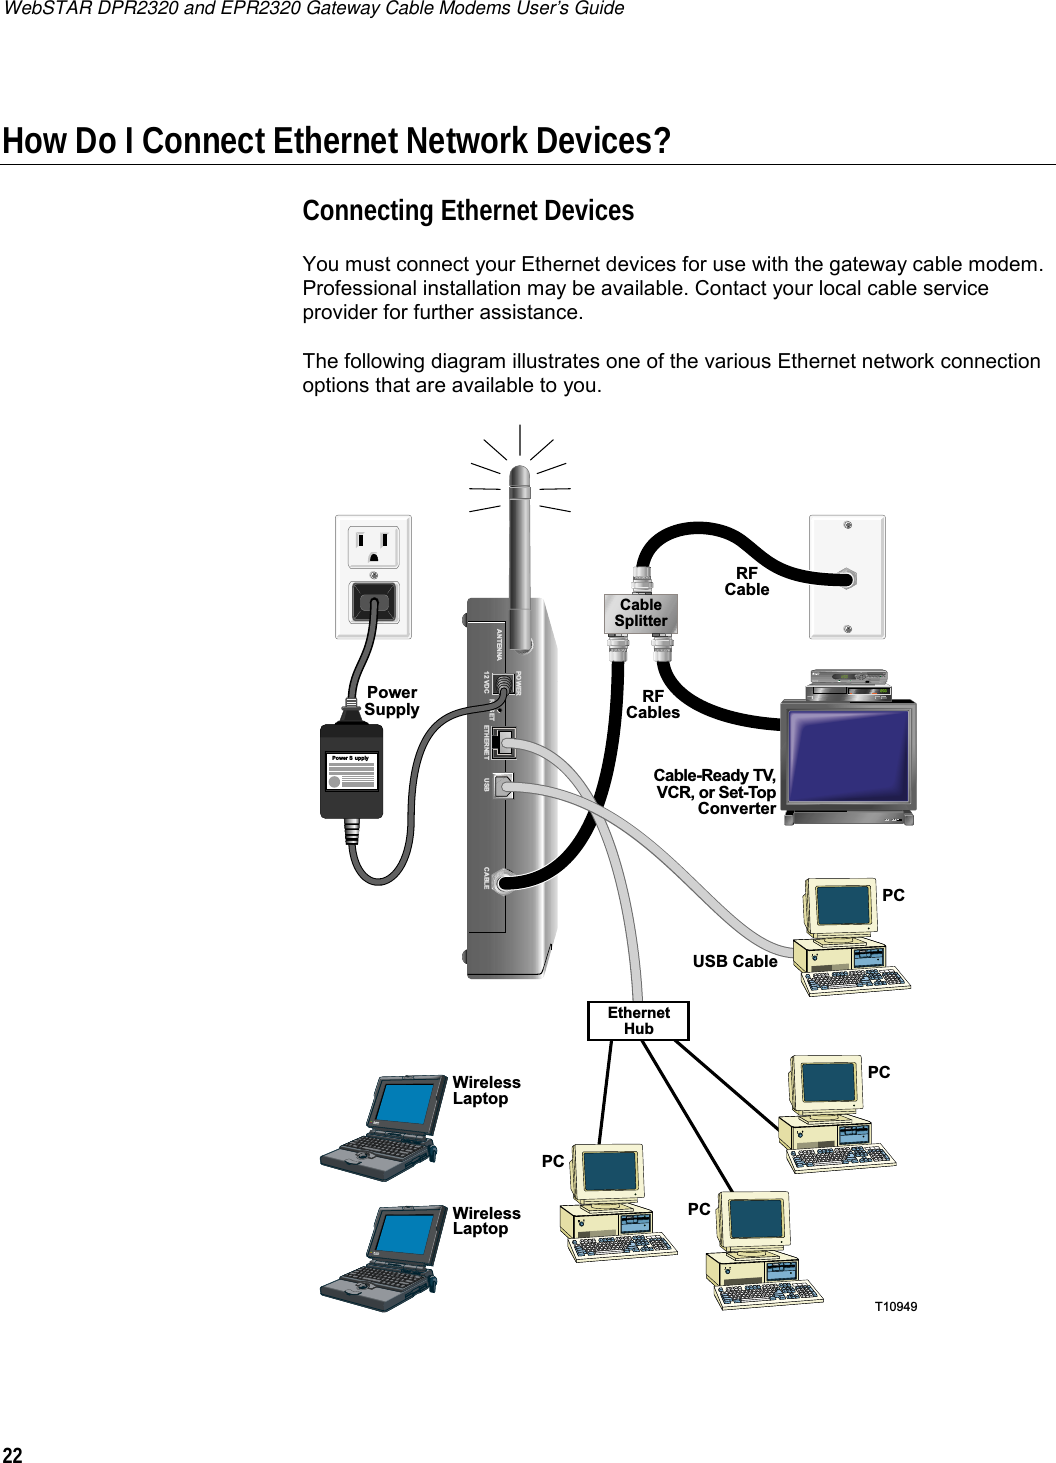 WebSTAR DPR2320 and EPR2320 Gateway Cable Modems User’s Guide 22  How Do I Connect Ethernet Network Devices? Connecting Ethernet Devices You must connect your Ethernet devices for use with the gateway cable modem. Professional installation may be available. Contact your local cable service provider for further assistance. The following diagram illustrates one of the various Ethernet network connection options that are available to you.    POWERANTENNA12 VDC RESET ETHERNET CABLEUSBPowerSupplyCable-Ready TV, VCR, or Set-TopConverterPCUSB CableRFCableRFCablesCable SplitterT10949Power SupplyBYPASSVOLñVOL+CH+CHñMENU GUIDE INFO A/B POWEREthernetHubPCPCWirelessLaptopPCWirelessLaptop   